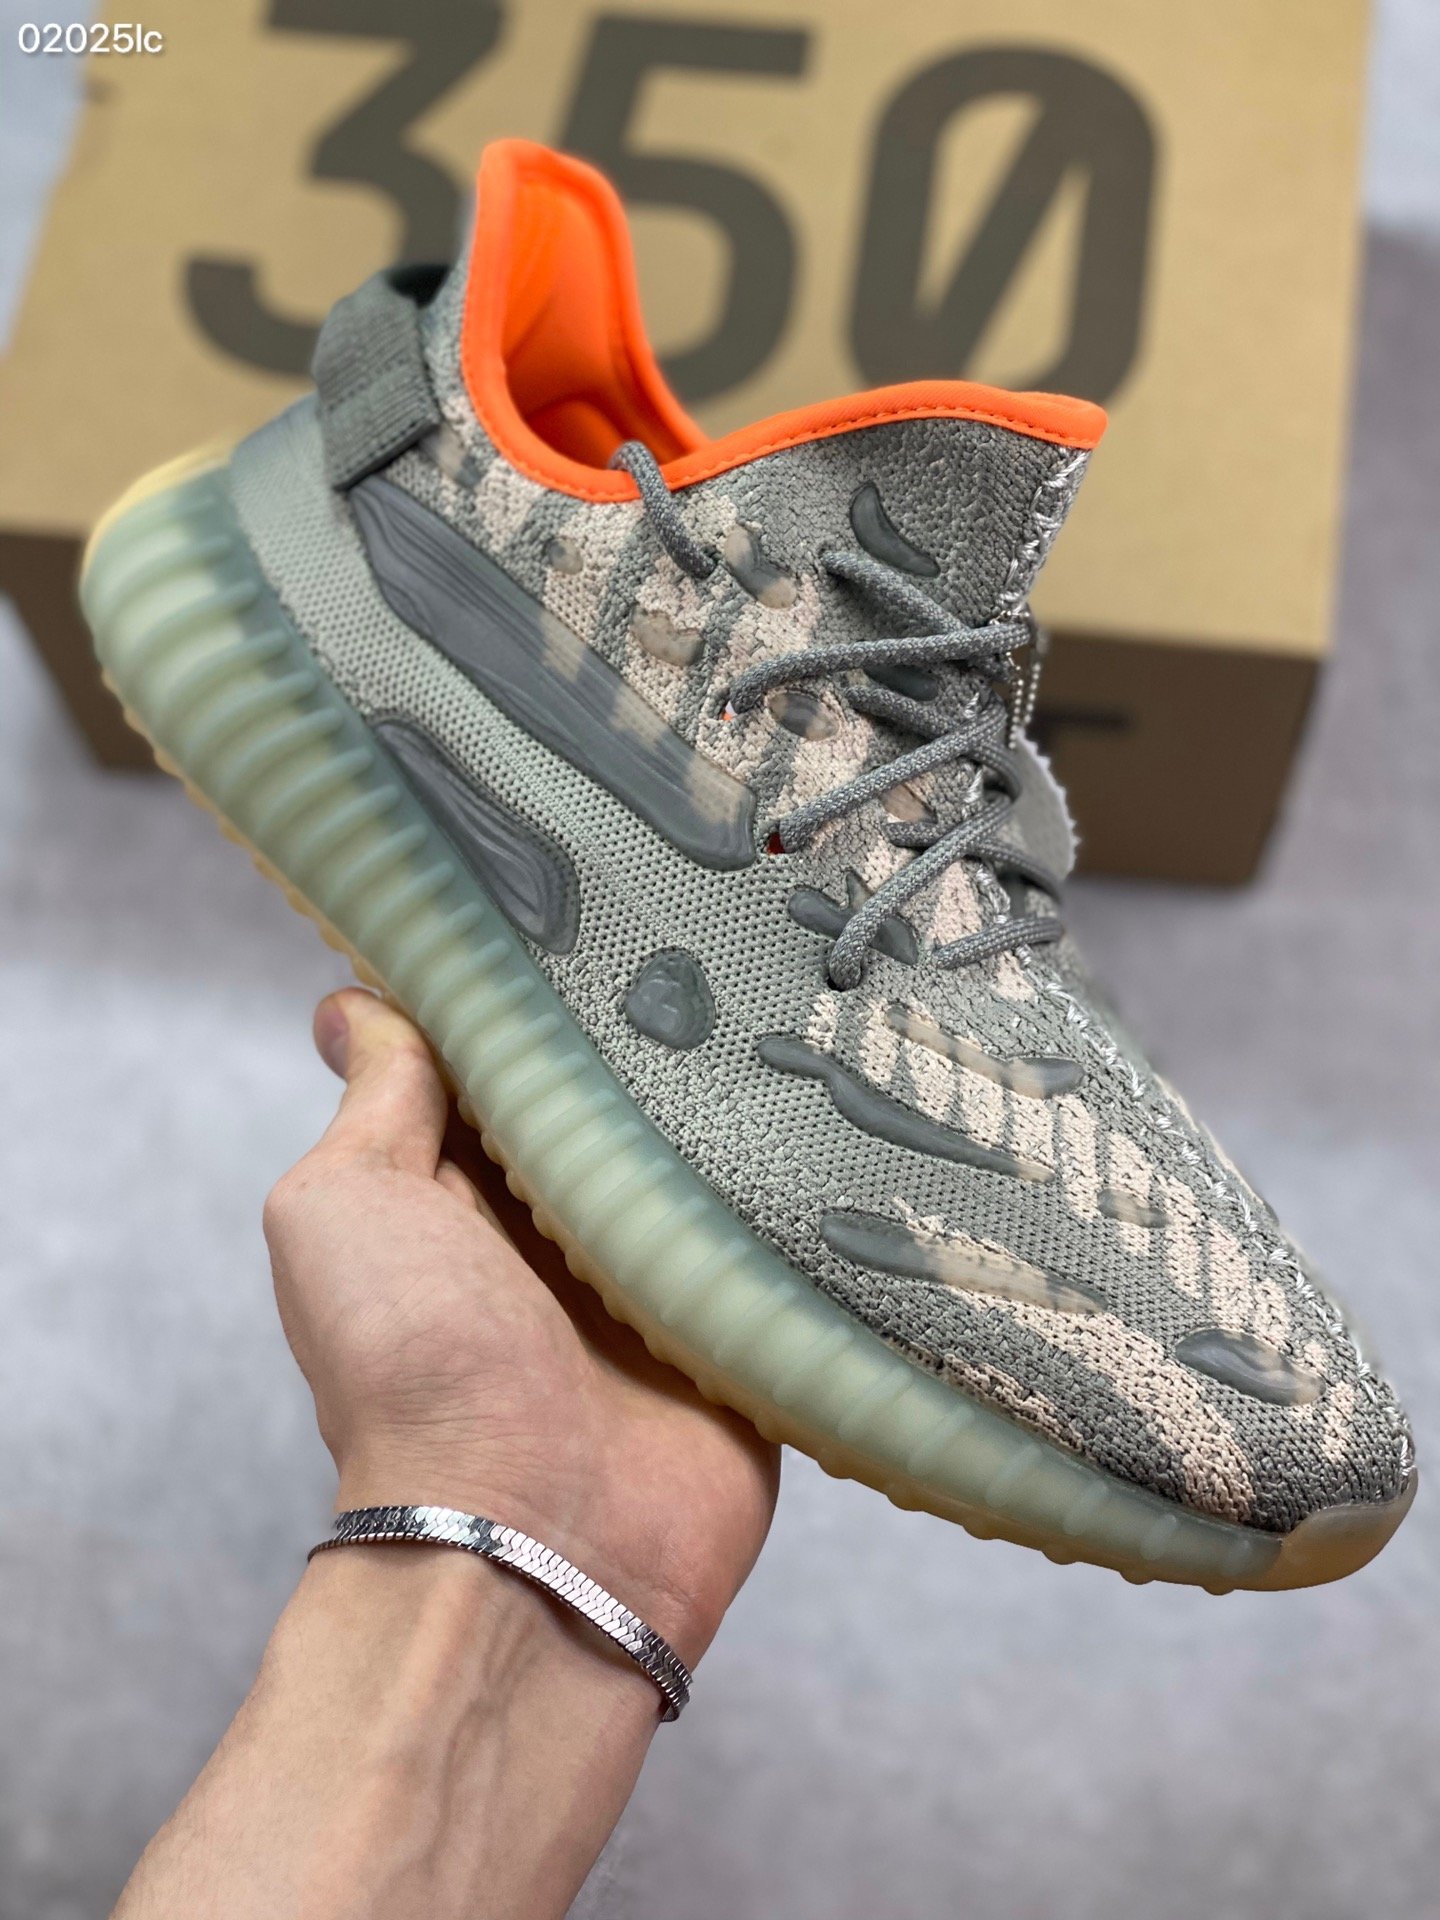 2020 cheap Adidas yeezy Boost 350 V2 Sneakers Unisex # 225176, cheap Adidas Yeezy Shoes, only $99!